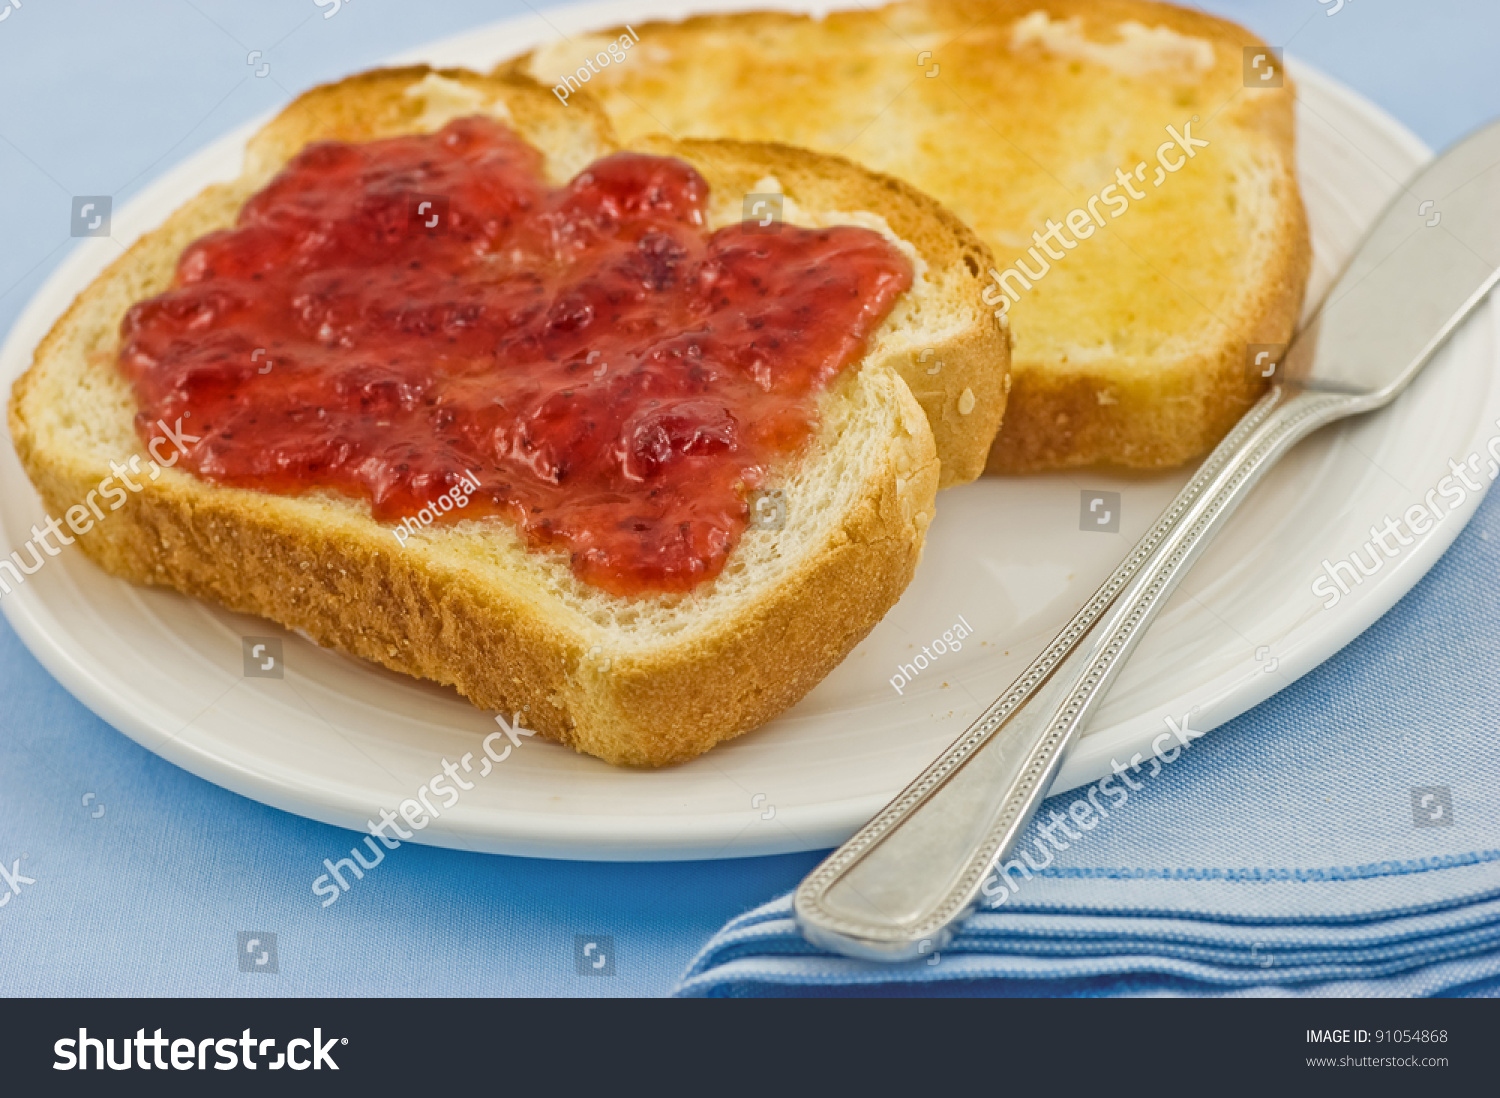 stock-photo-fresh-buttered-toast-with-strawberry-jam-on-blue-background-91054868.jpg